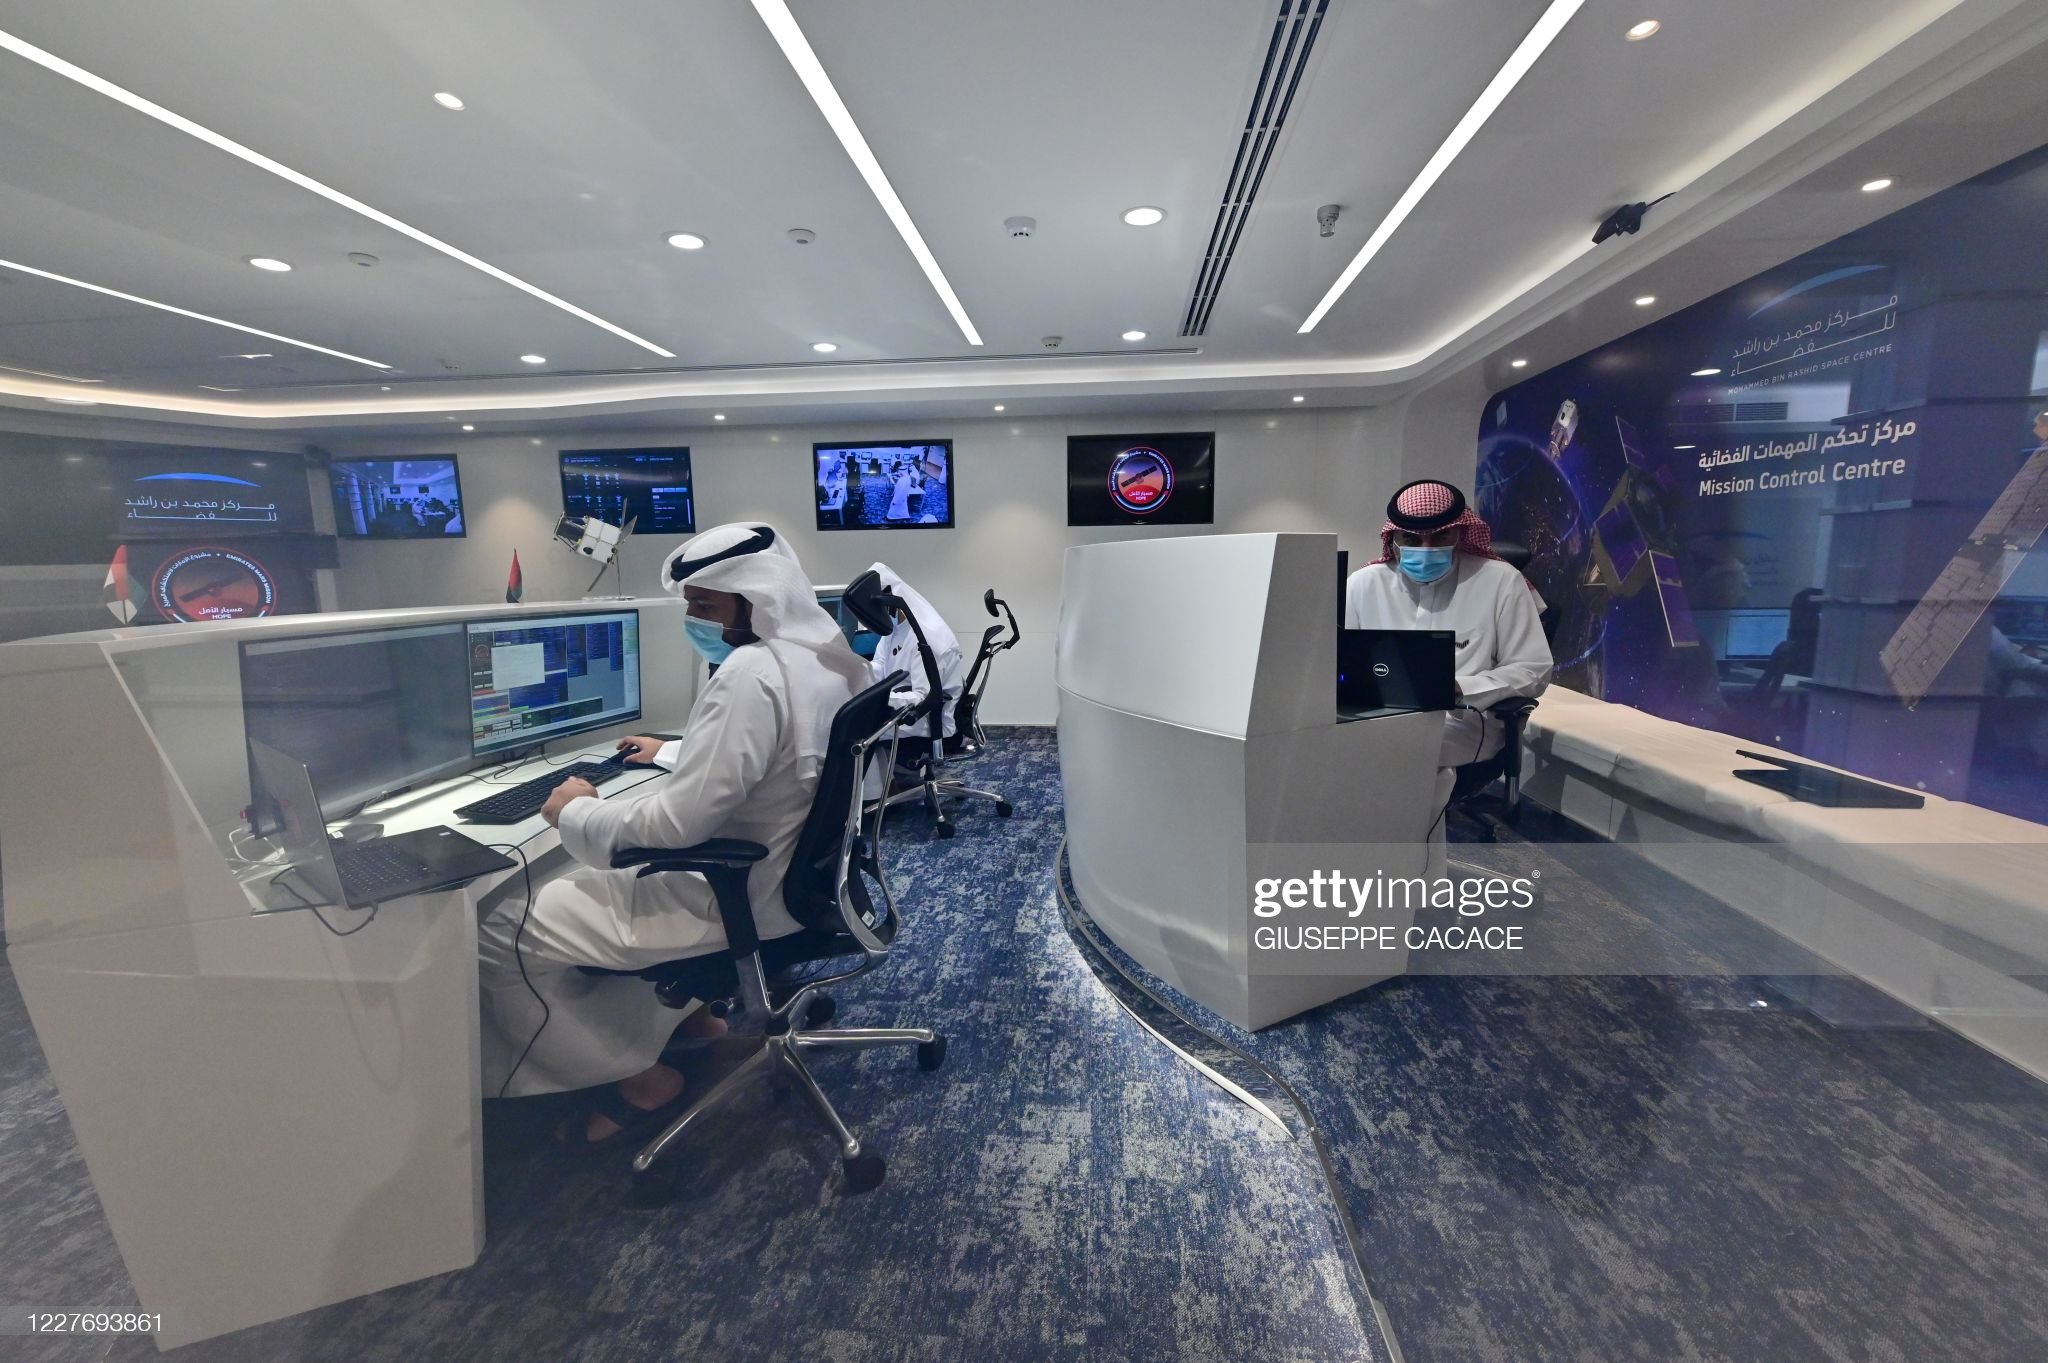 emirati-men-are-pictured-at-the-mission-control-center-for-the-hope-picture-id1227693861